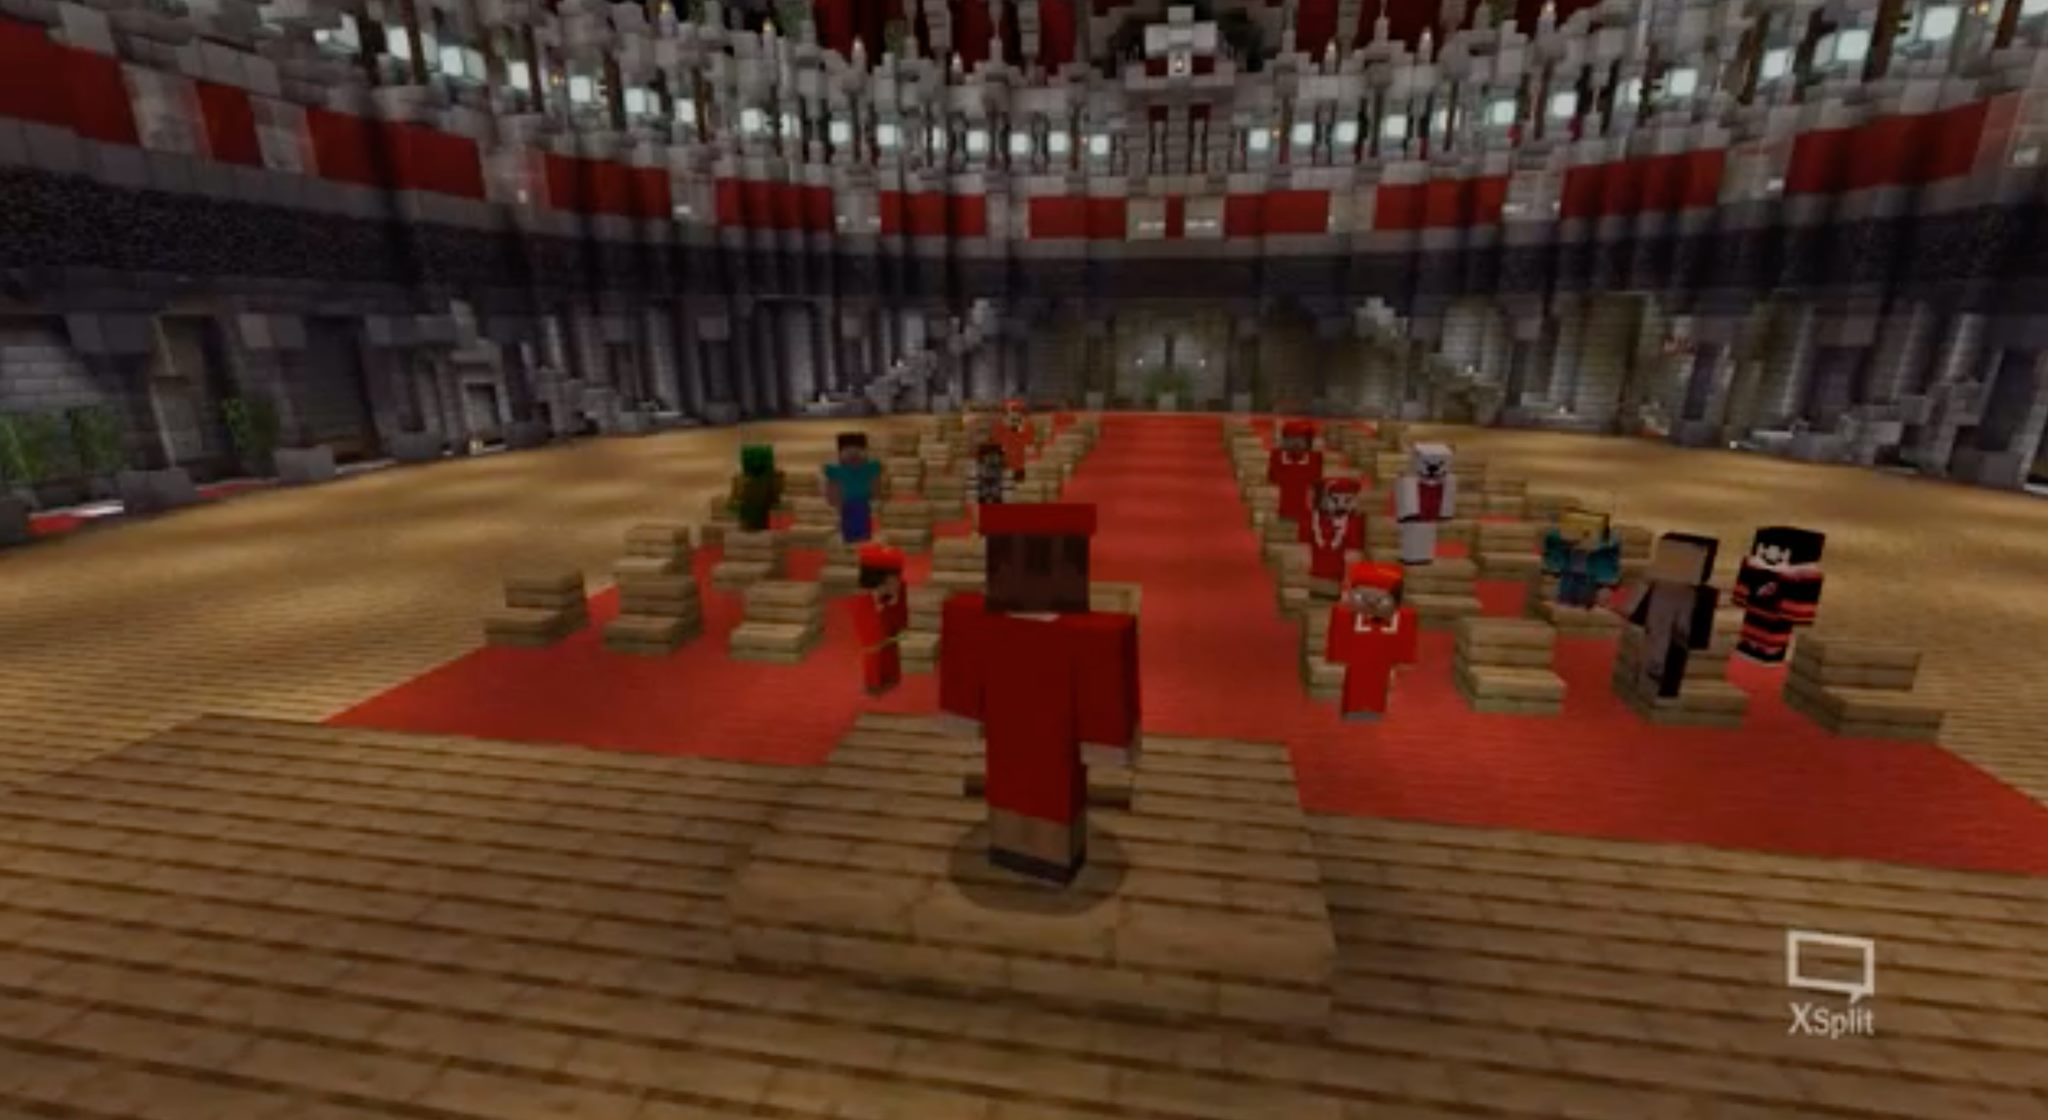 Tanner Compton's Minecraft character, dressed in red graduation robes, addresses an audience of other Minecraft players/NC State graduates in the Minecraft version of PNC Arena